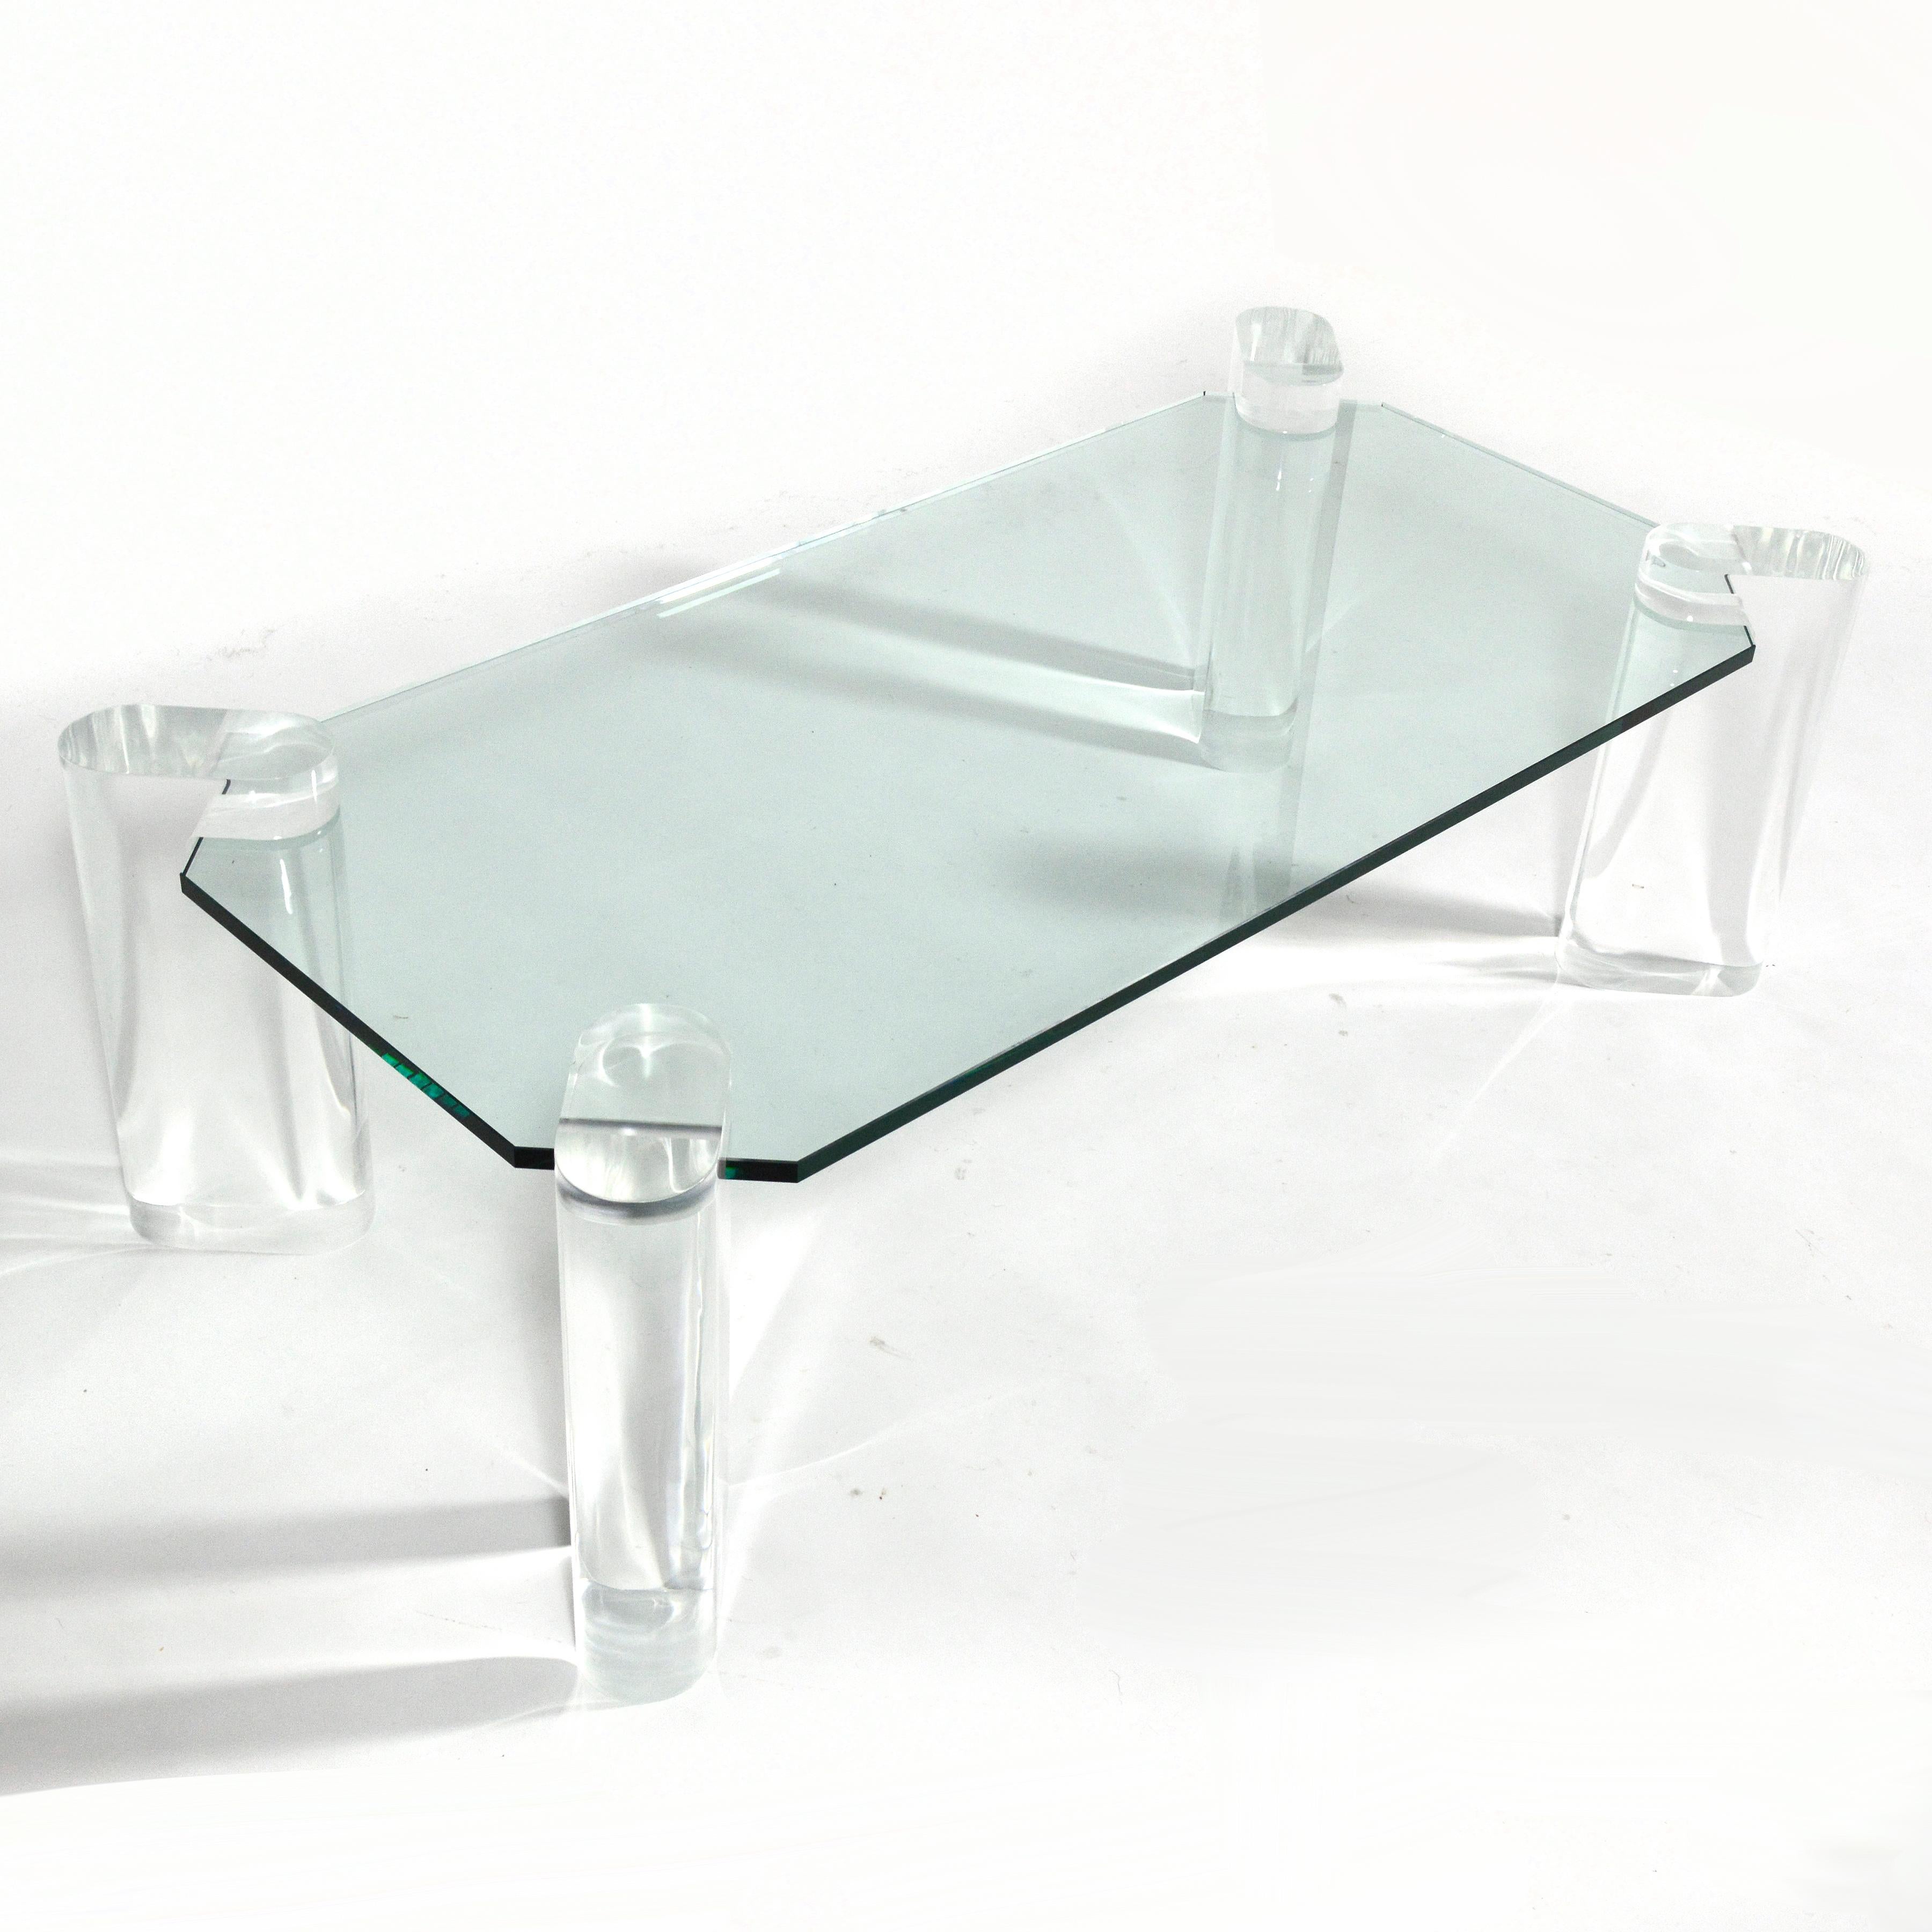 Stunning in it's simplicity and use of transparent materials, this coffee table by Karl Springer has four oval lucite legs with cut-aways that support the glass top which is notched in the corners. We think this design would also look terrific with